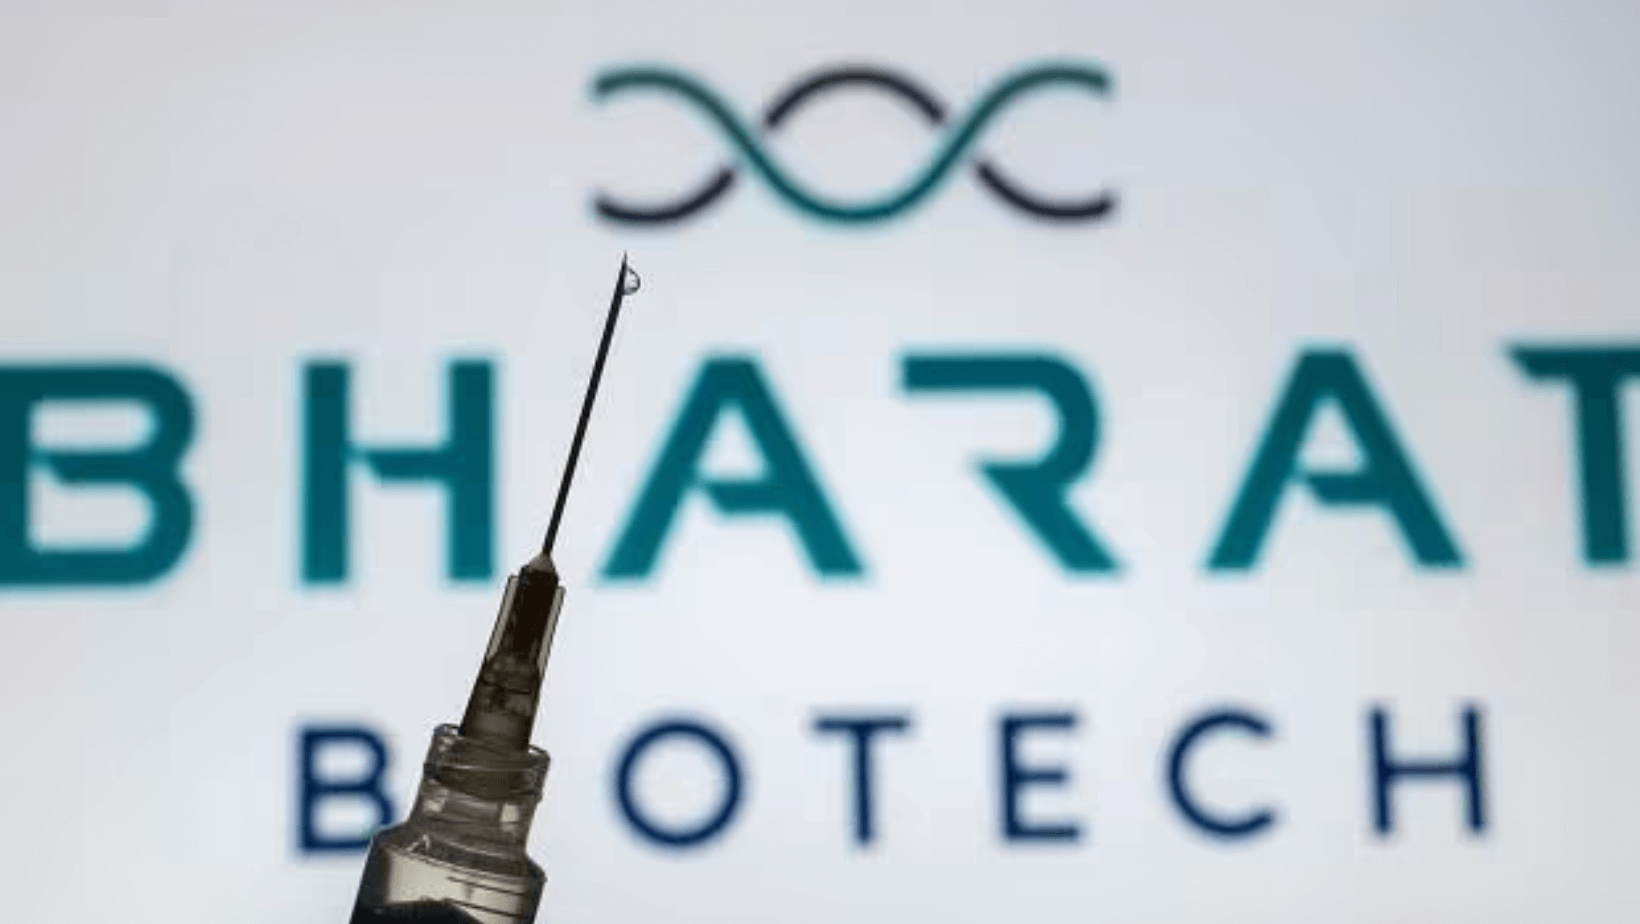 Bharat Biotech, University of Sydney Signed MoU for Vaccine Research